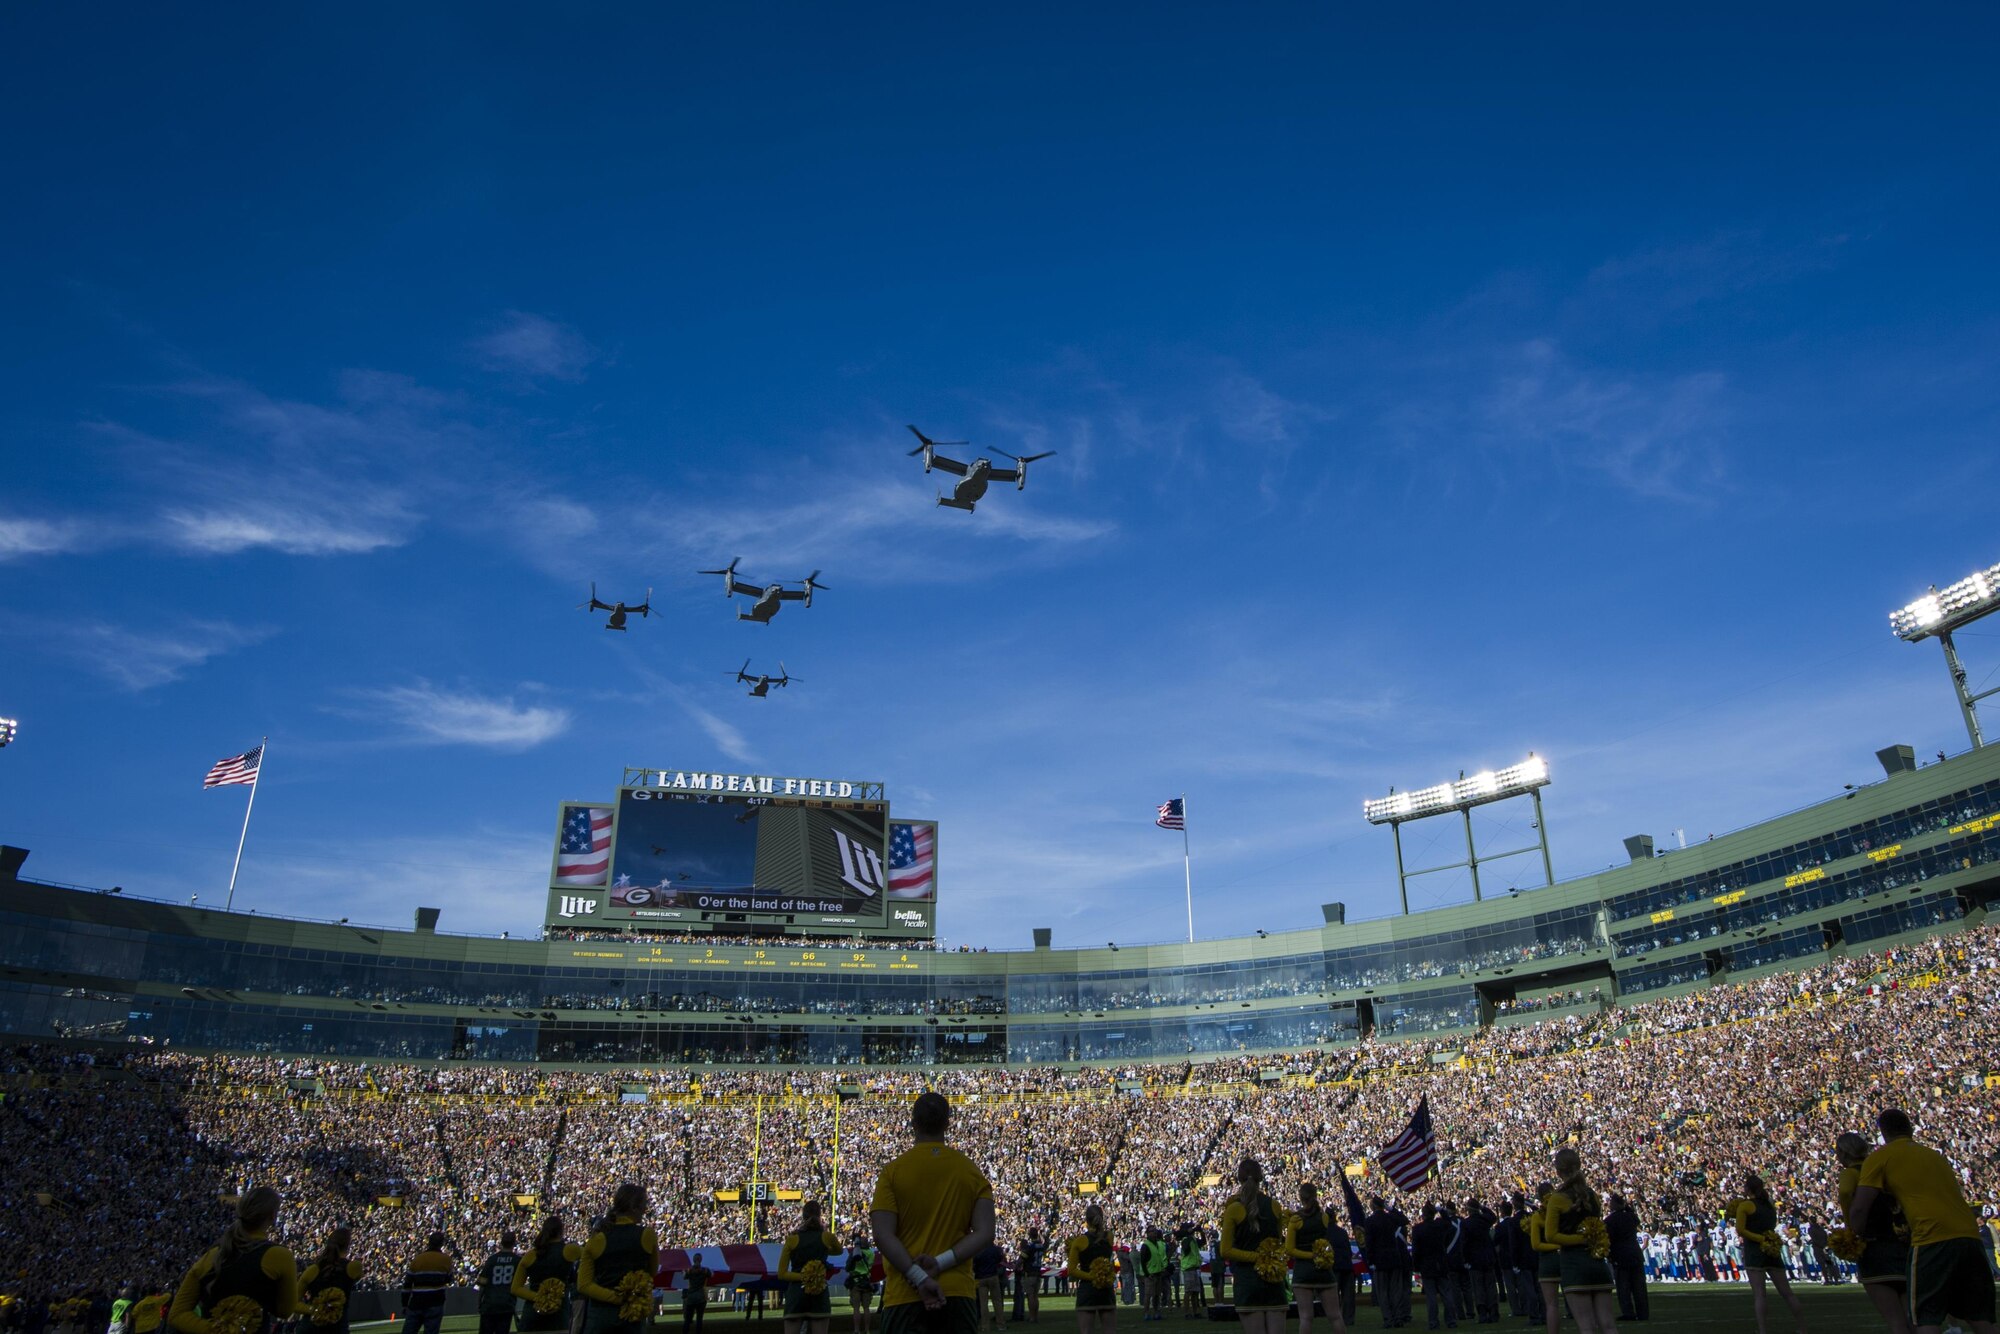 Four CV-22 Osprey aircraft with the 8th Special Operations Squadron from Hurlburt Field, Fla., flyover Lambeau Field, Wis., during the final moments of the national anthem, Oct. 16, 2016. The flyover marks the first time that the 8th SOS has conducted a flyover of an NFL game. The Osprey is a tiltrotor aircraft that combines the vertical takeoff, hover and vertical landing qualities of a helicopter with the long-range, fuel efficiency and speed characteristics of a turboprop aircraft. (U.S. Air Force photo by Airman 1st Class Joseph Pick)